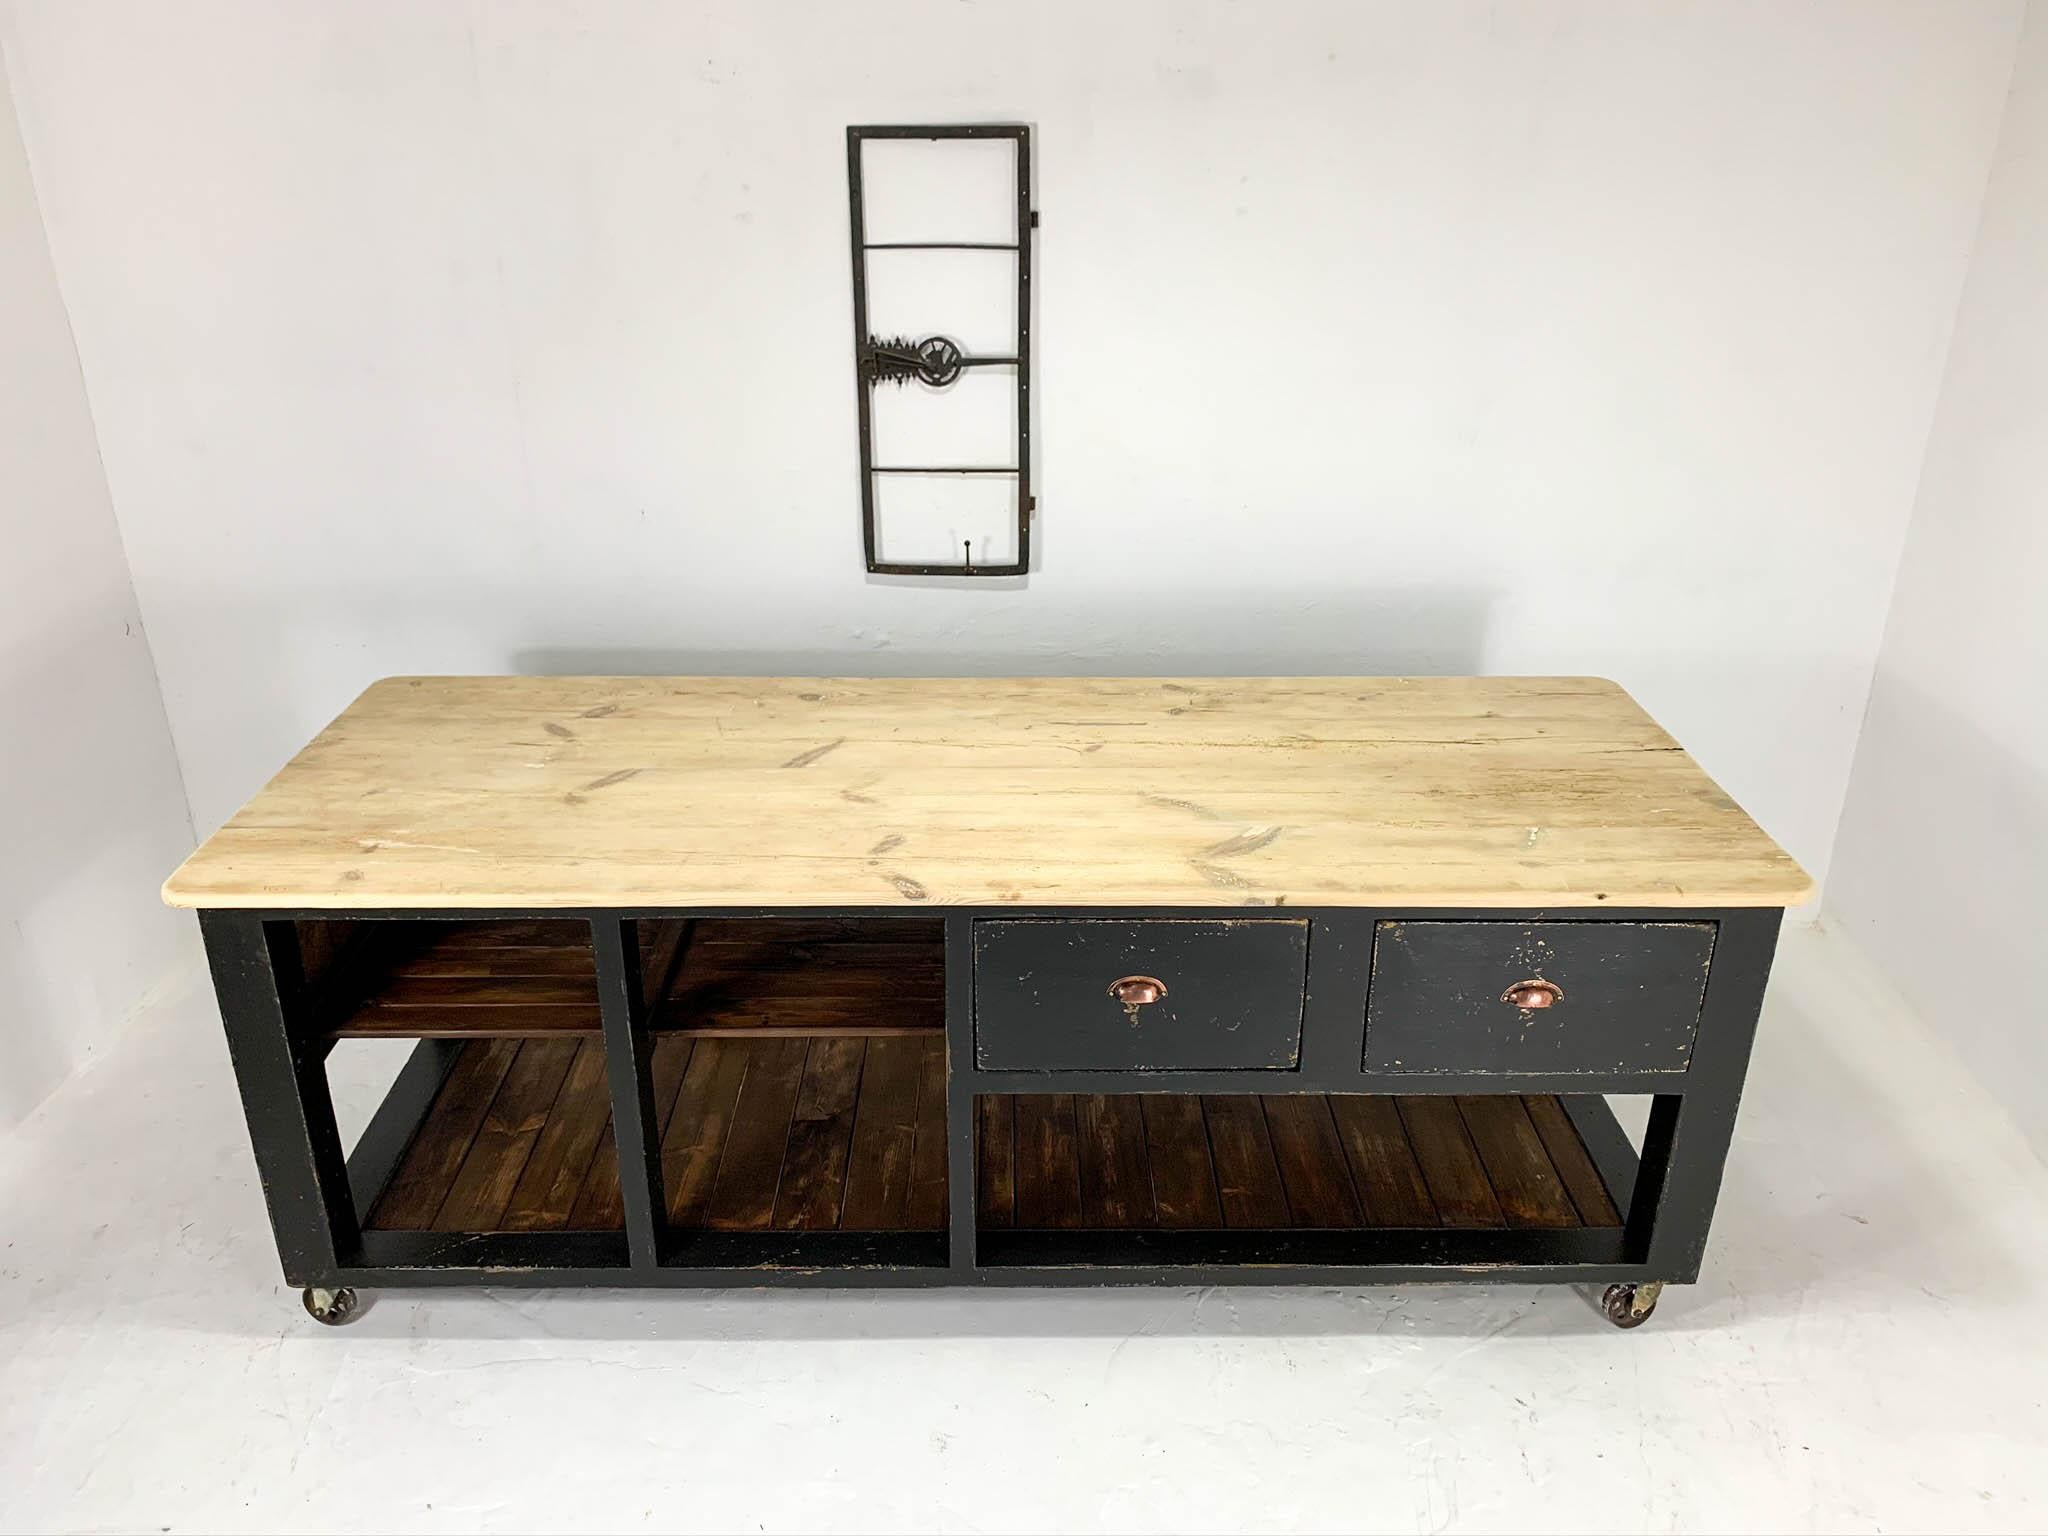 Vintage Industrial English Country House WorkTable Workbench Pine Kitchen Island 11